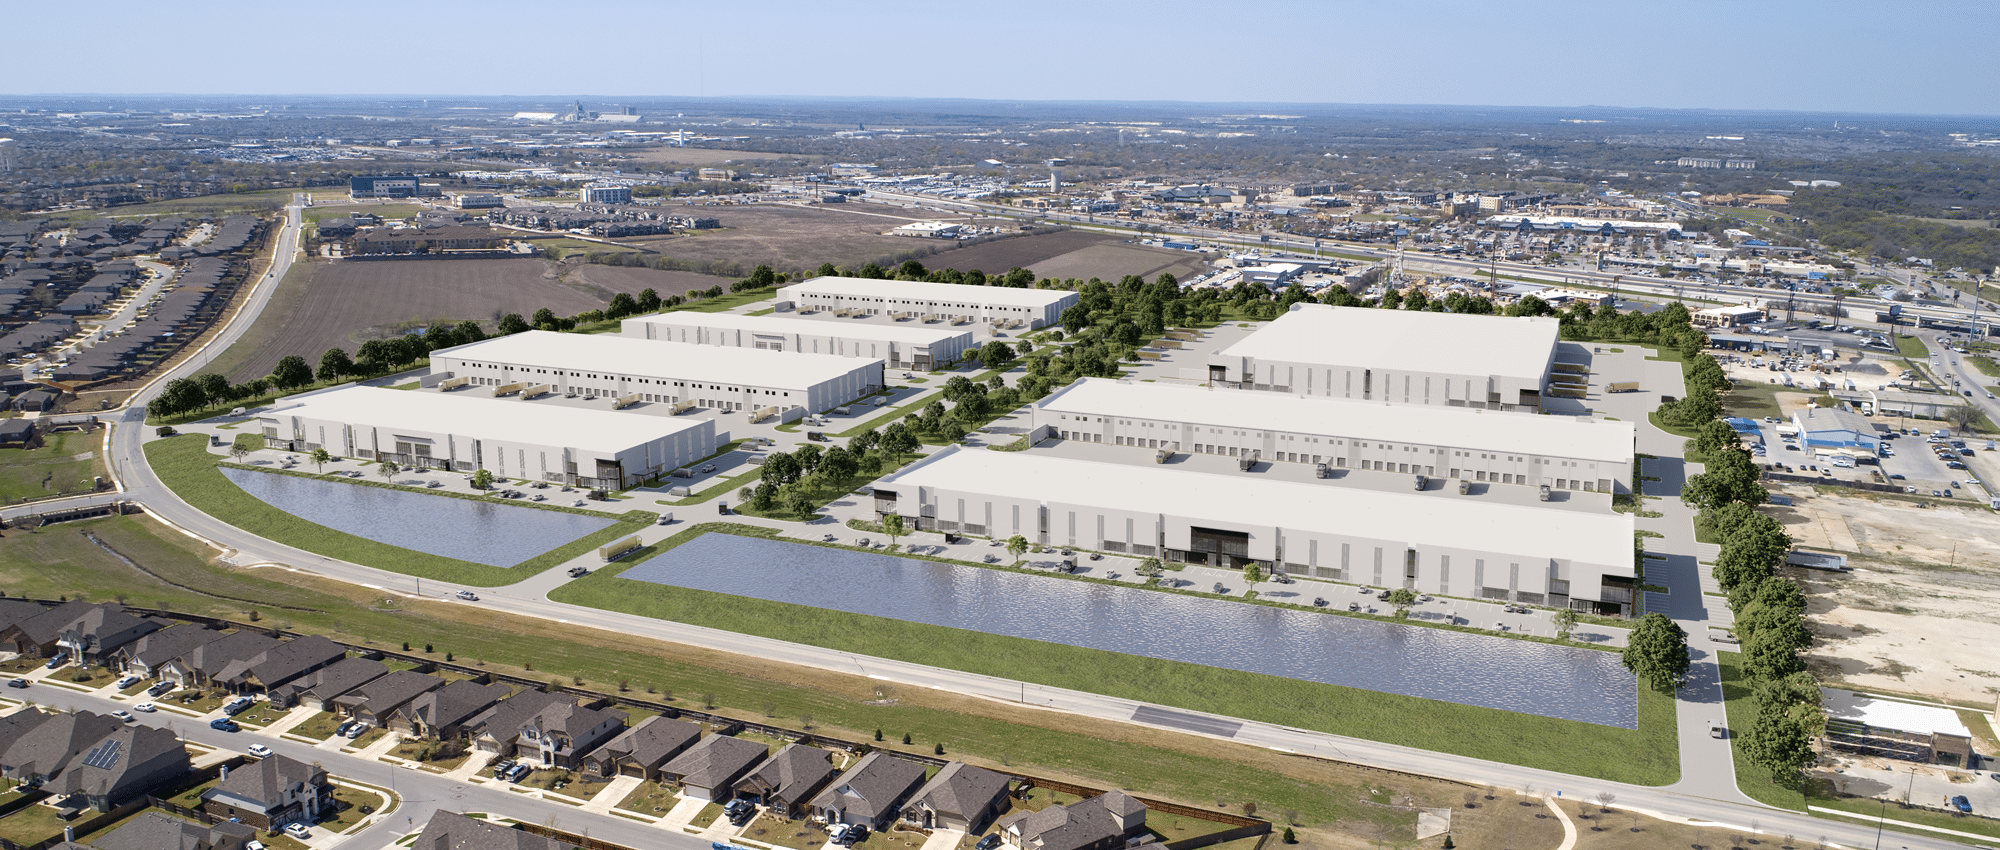 Outer Aisle to plant manufacturing hub in Kyle - Austin Business Journal